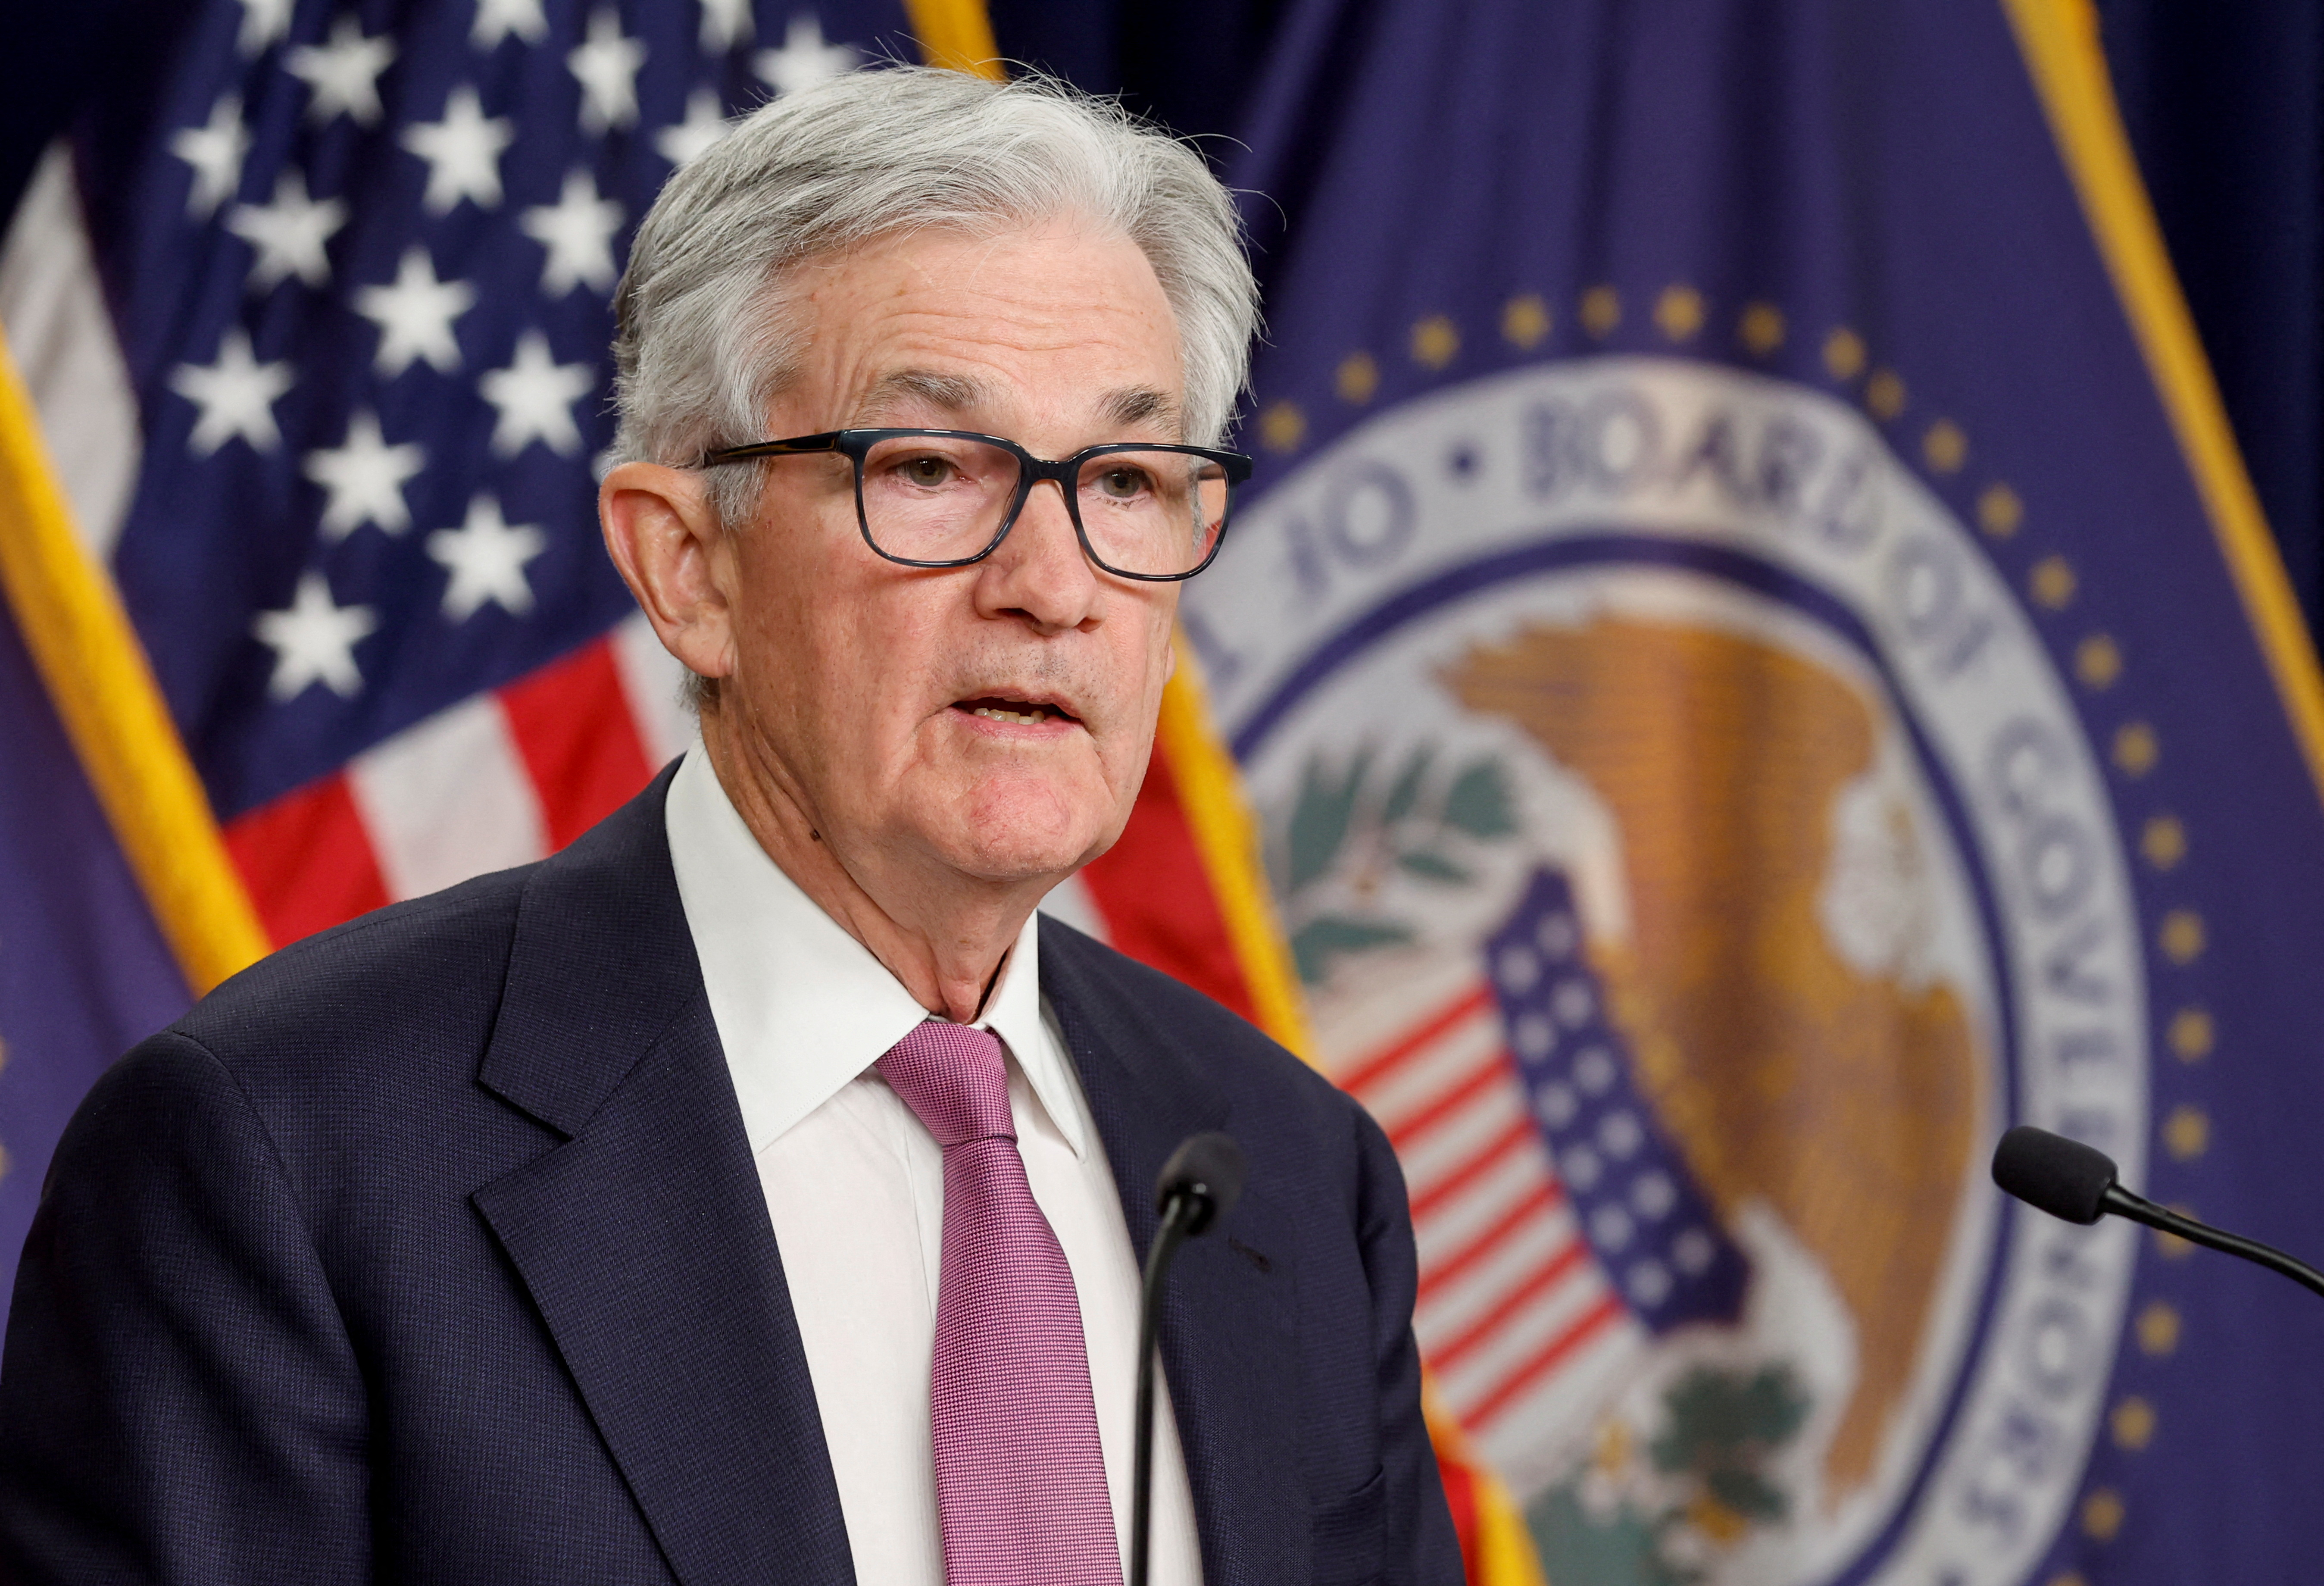 U.S. Federal Reserve Chair Powell holds news conference after Fed announced quarter point interest rate hike in Washington